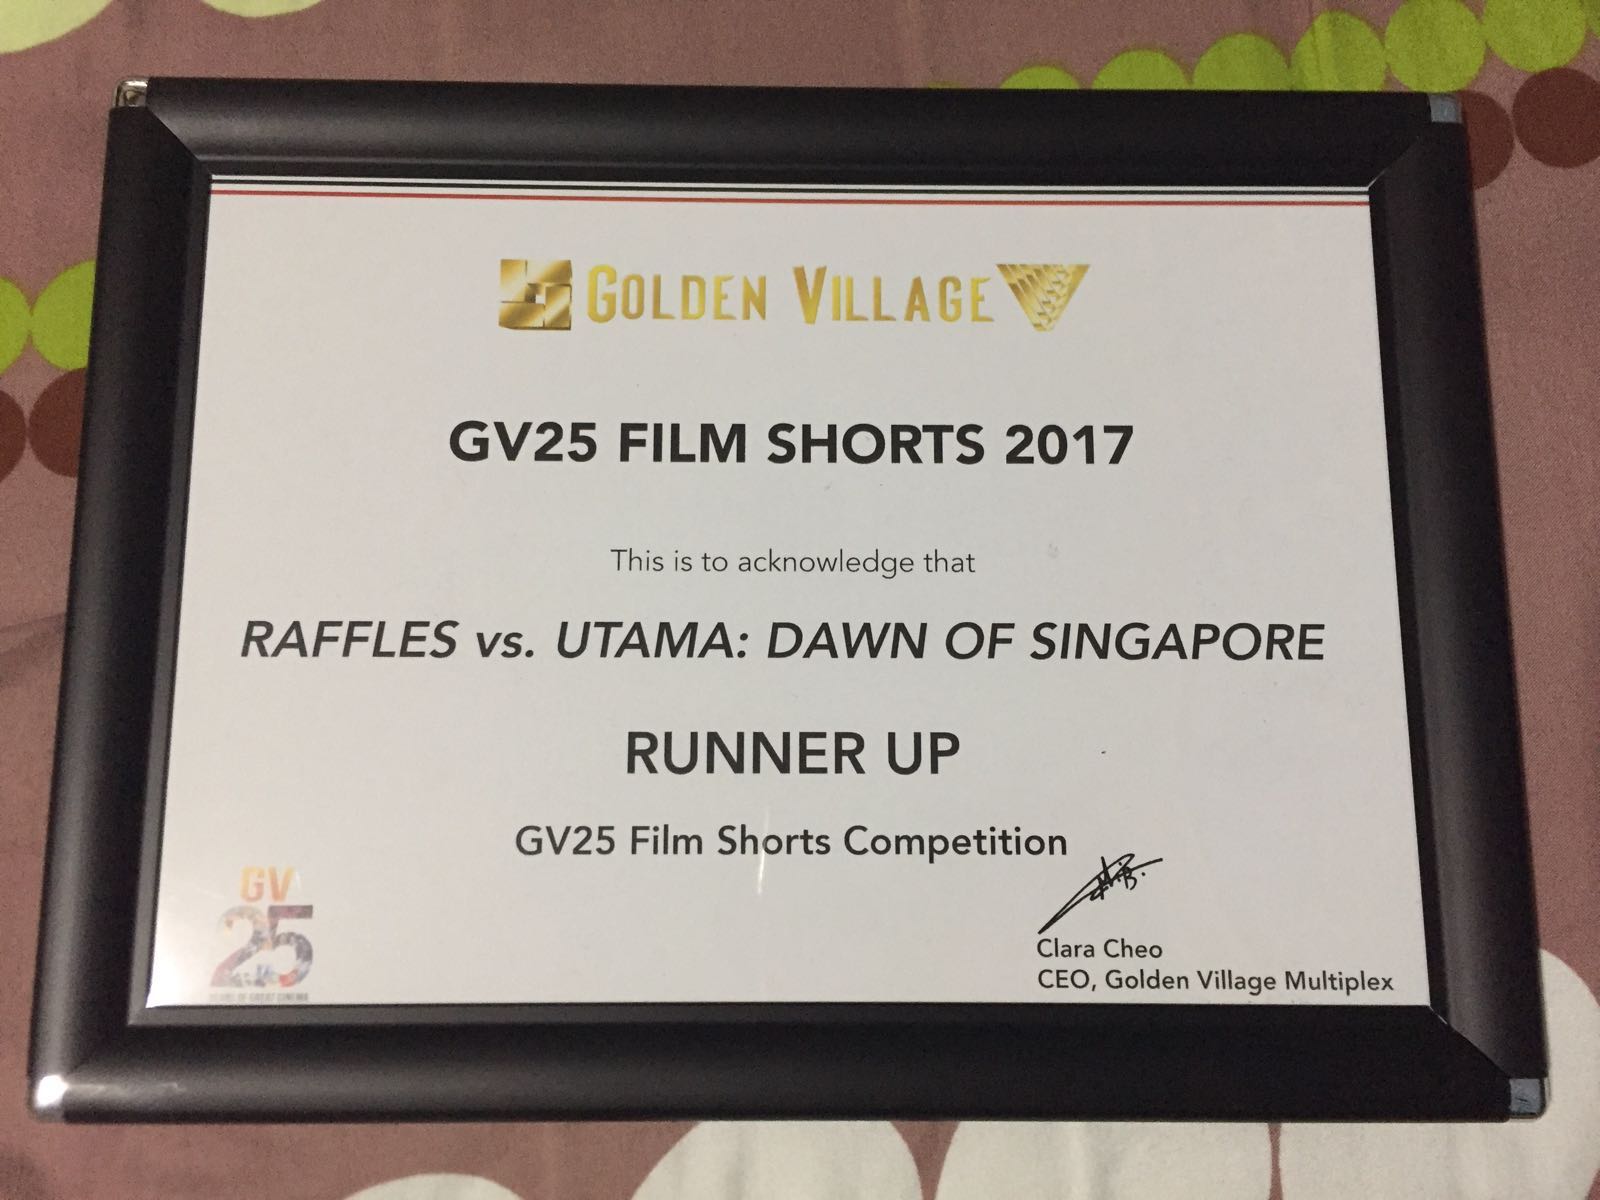 Runner Up for the GV25 Film Shorts Competition